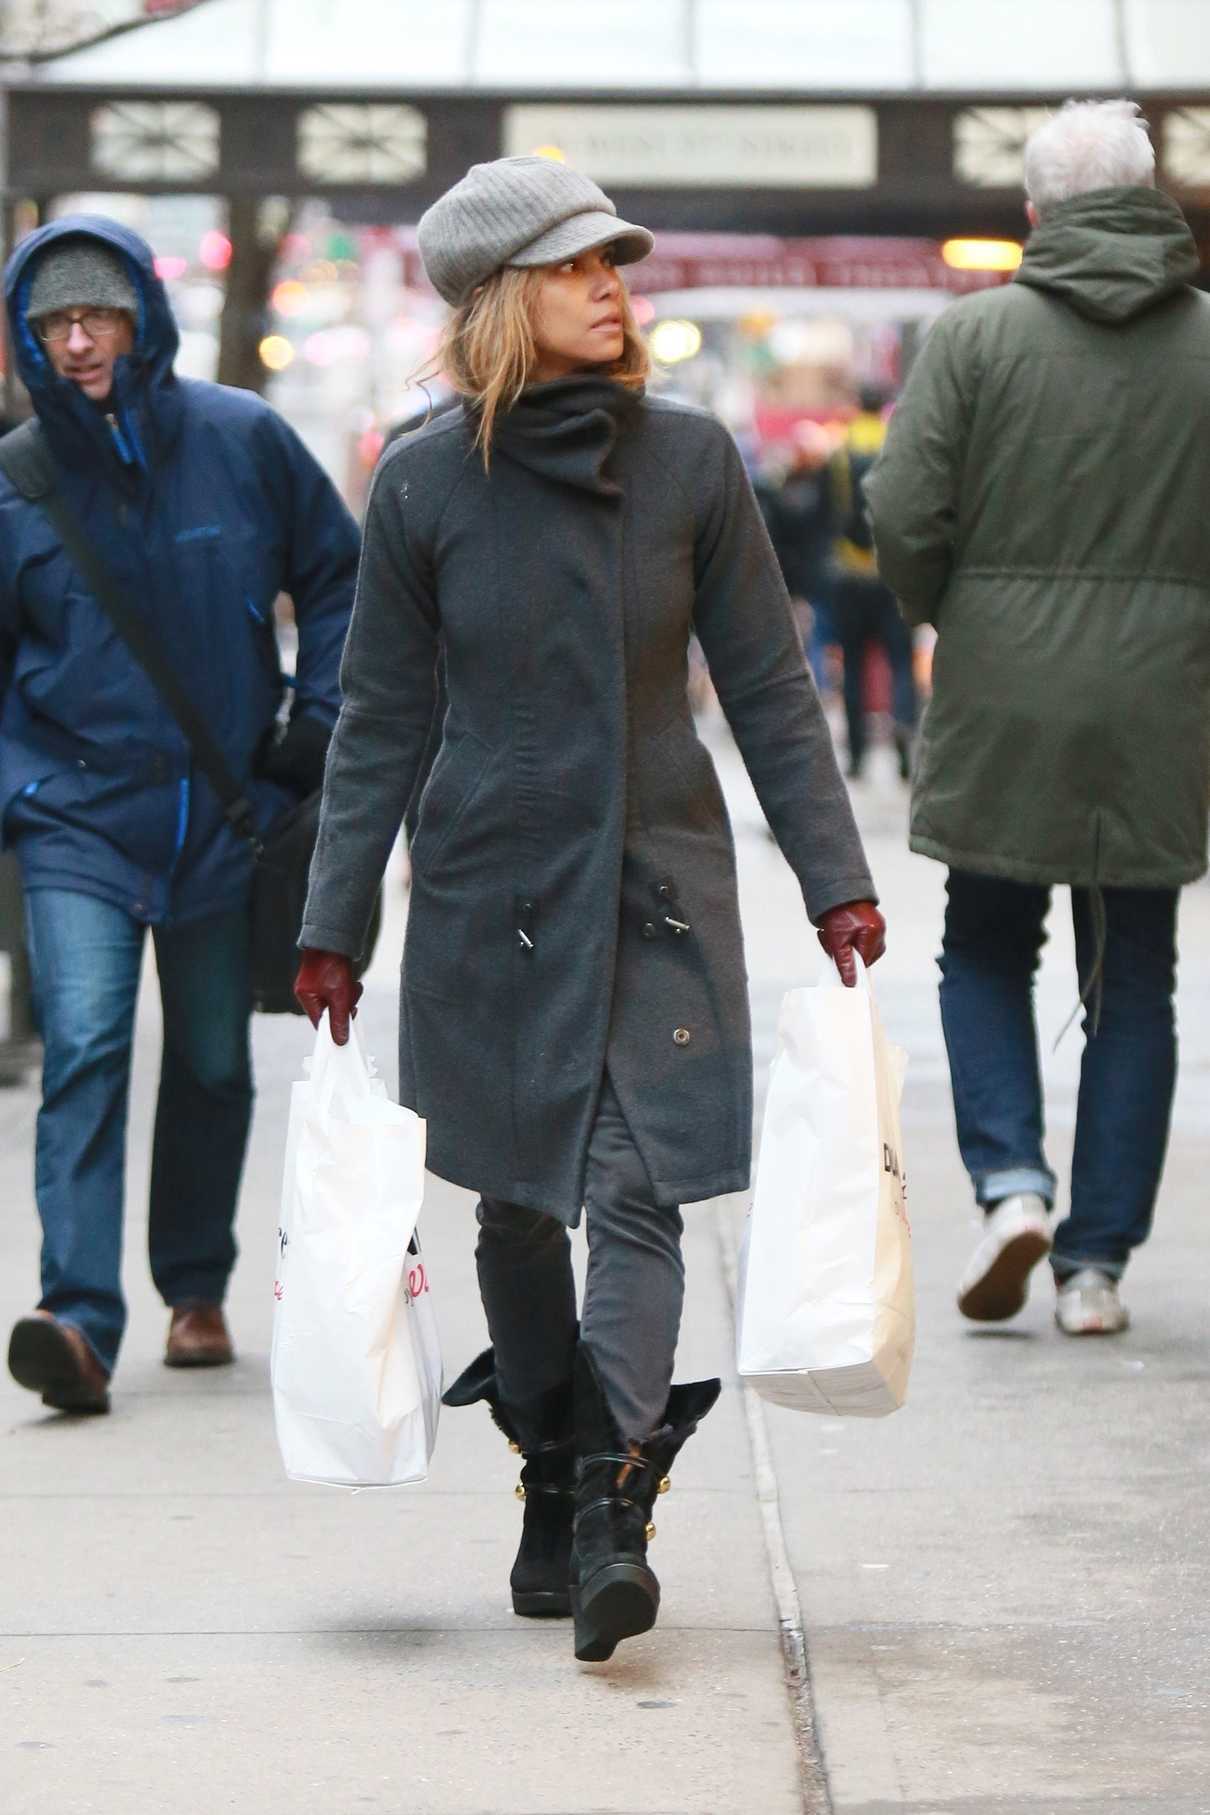 Halle Berry in a Black Coat Goes Shopping at Duane Reade Drugstore in ...